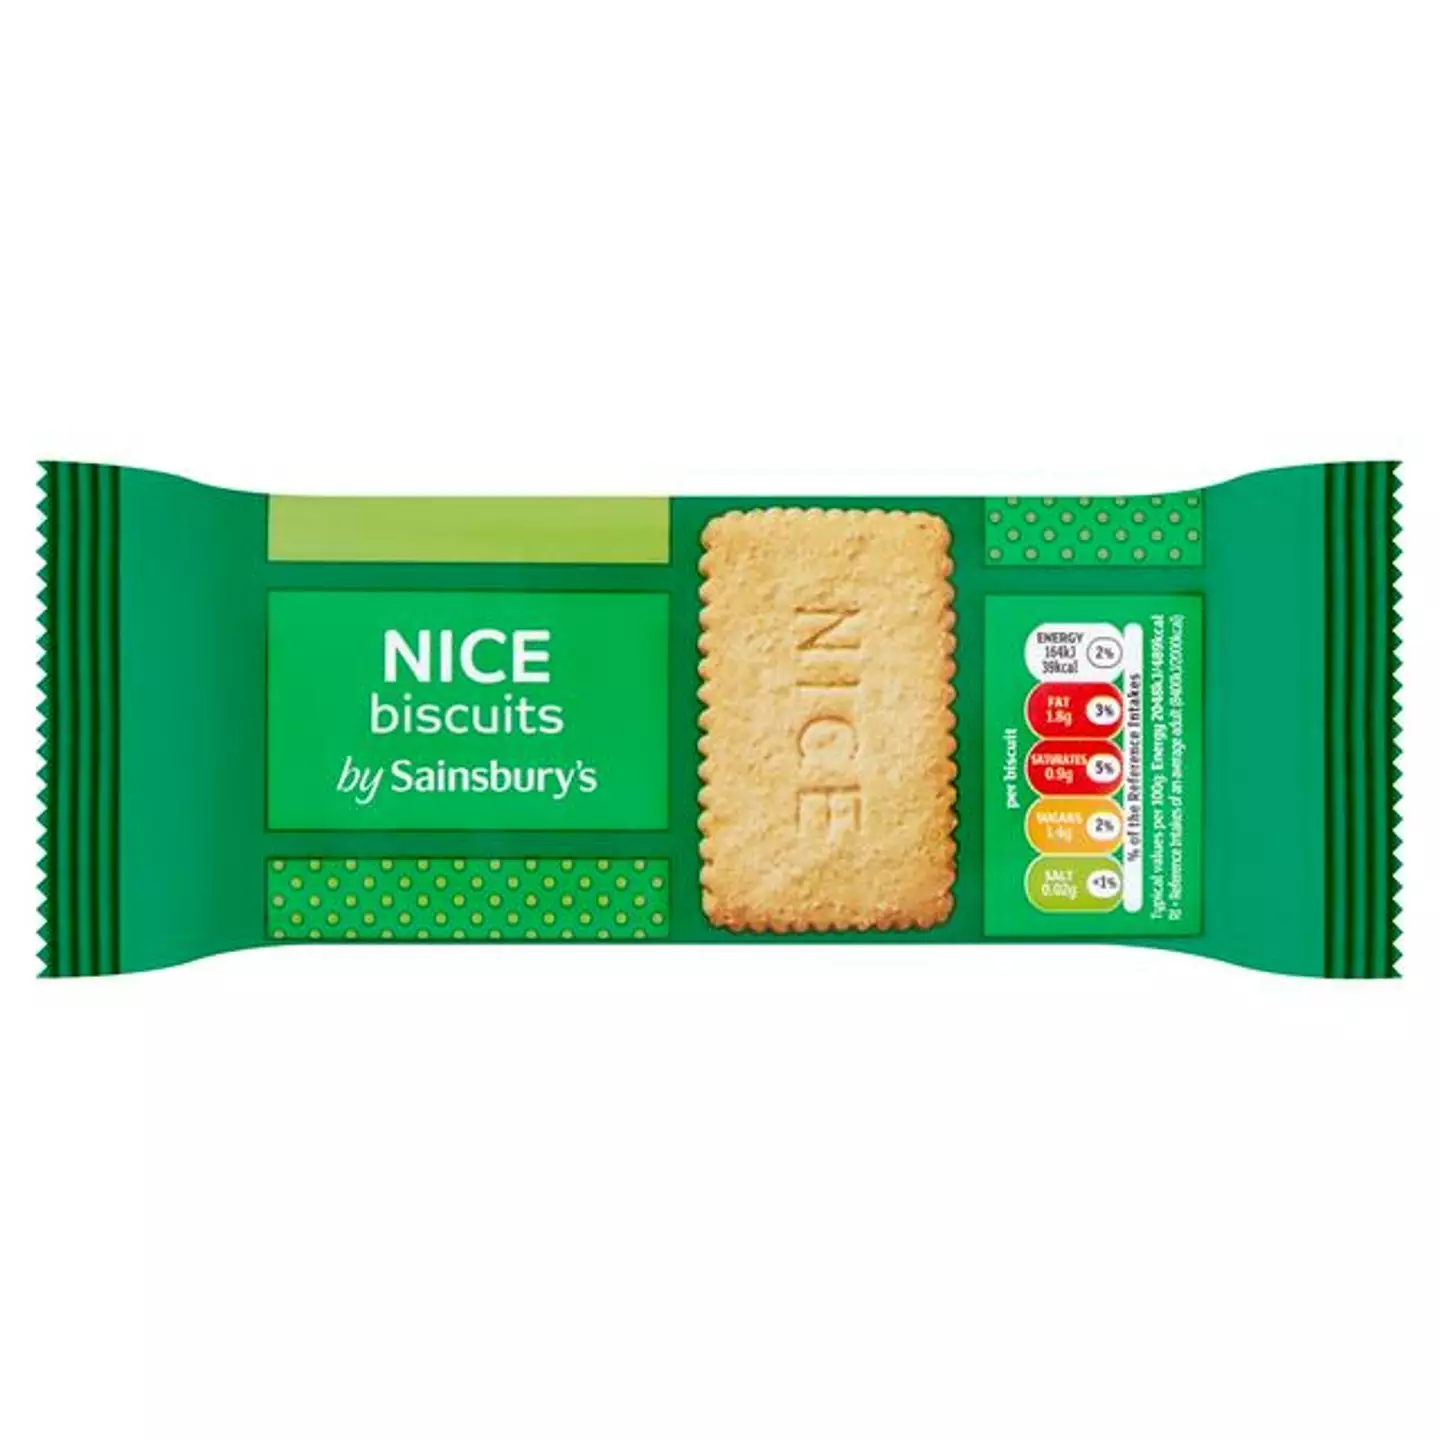 Nice biscuits are an elite snack and are known for their distinct texture and sugary coating. (Sainsbury's)